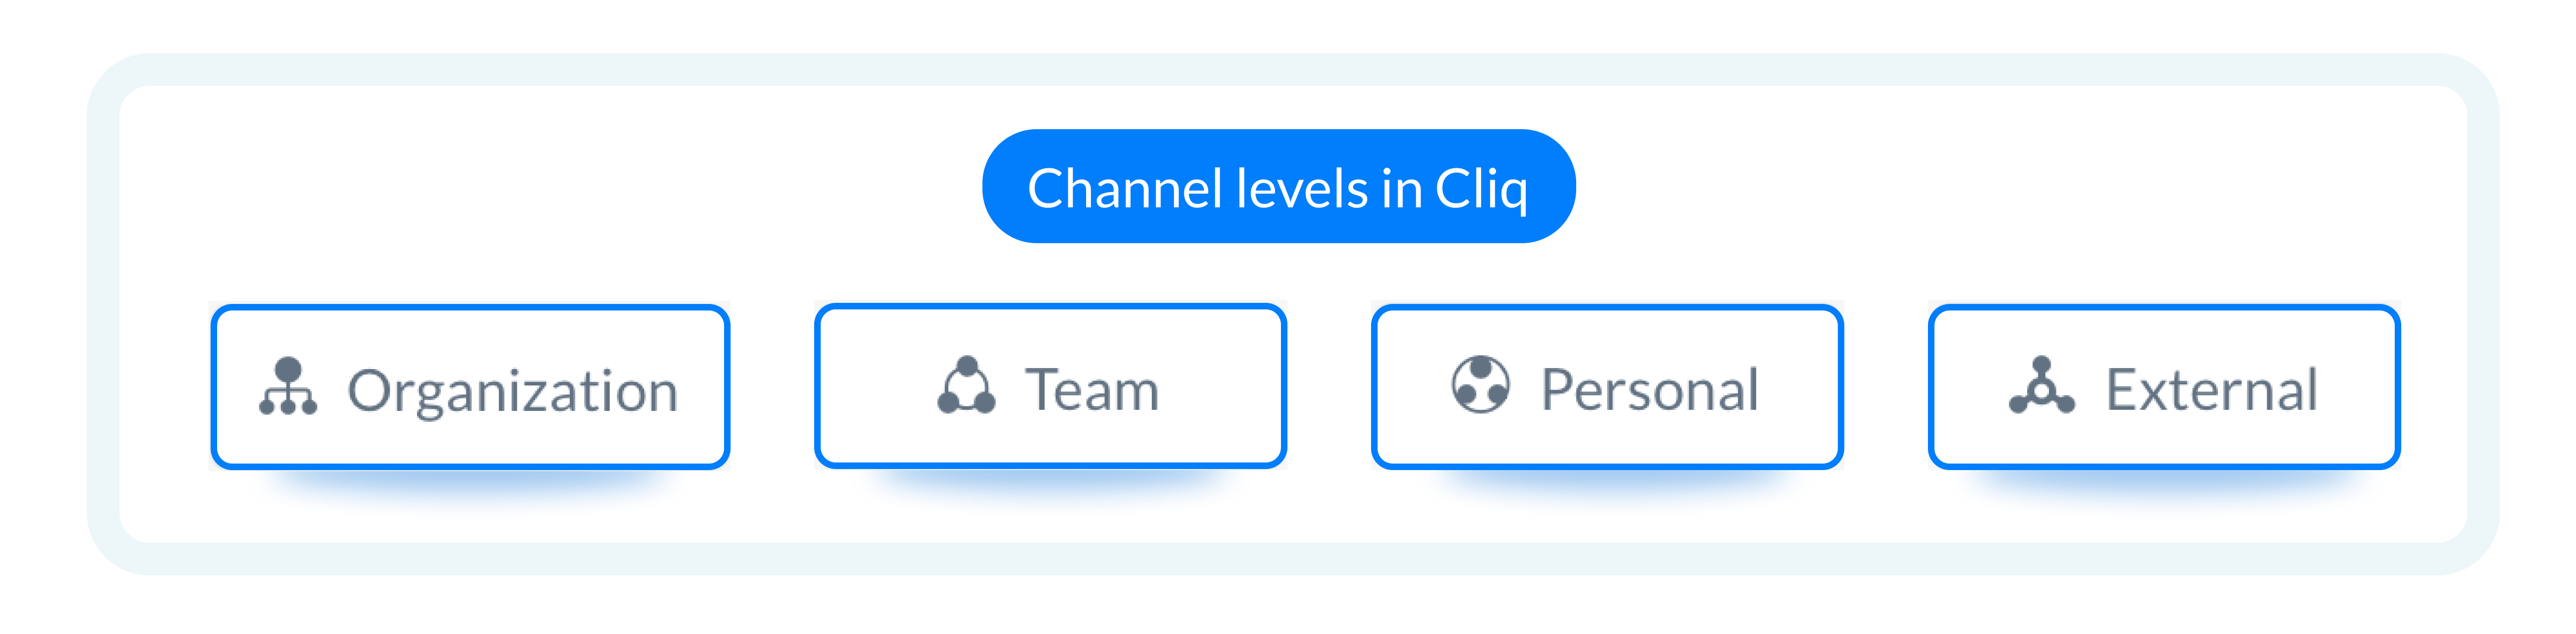 Channels in Cliq help structure and streamline your communication and offer four levels: organization, team, personal, and external.